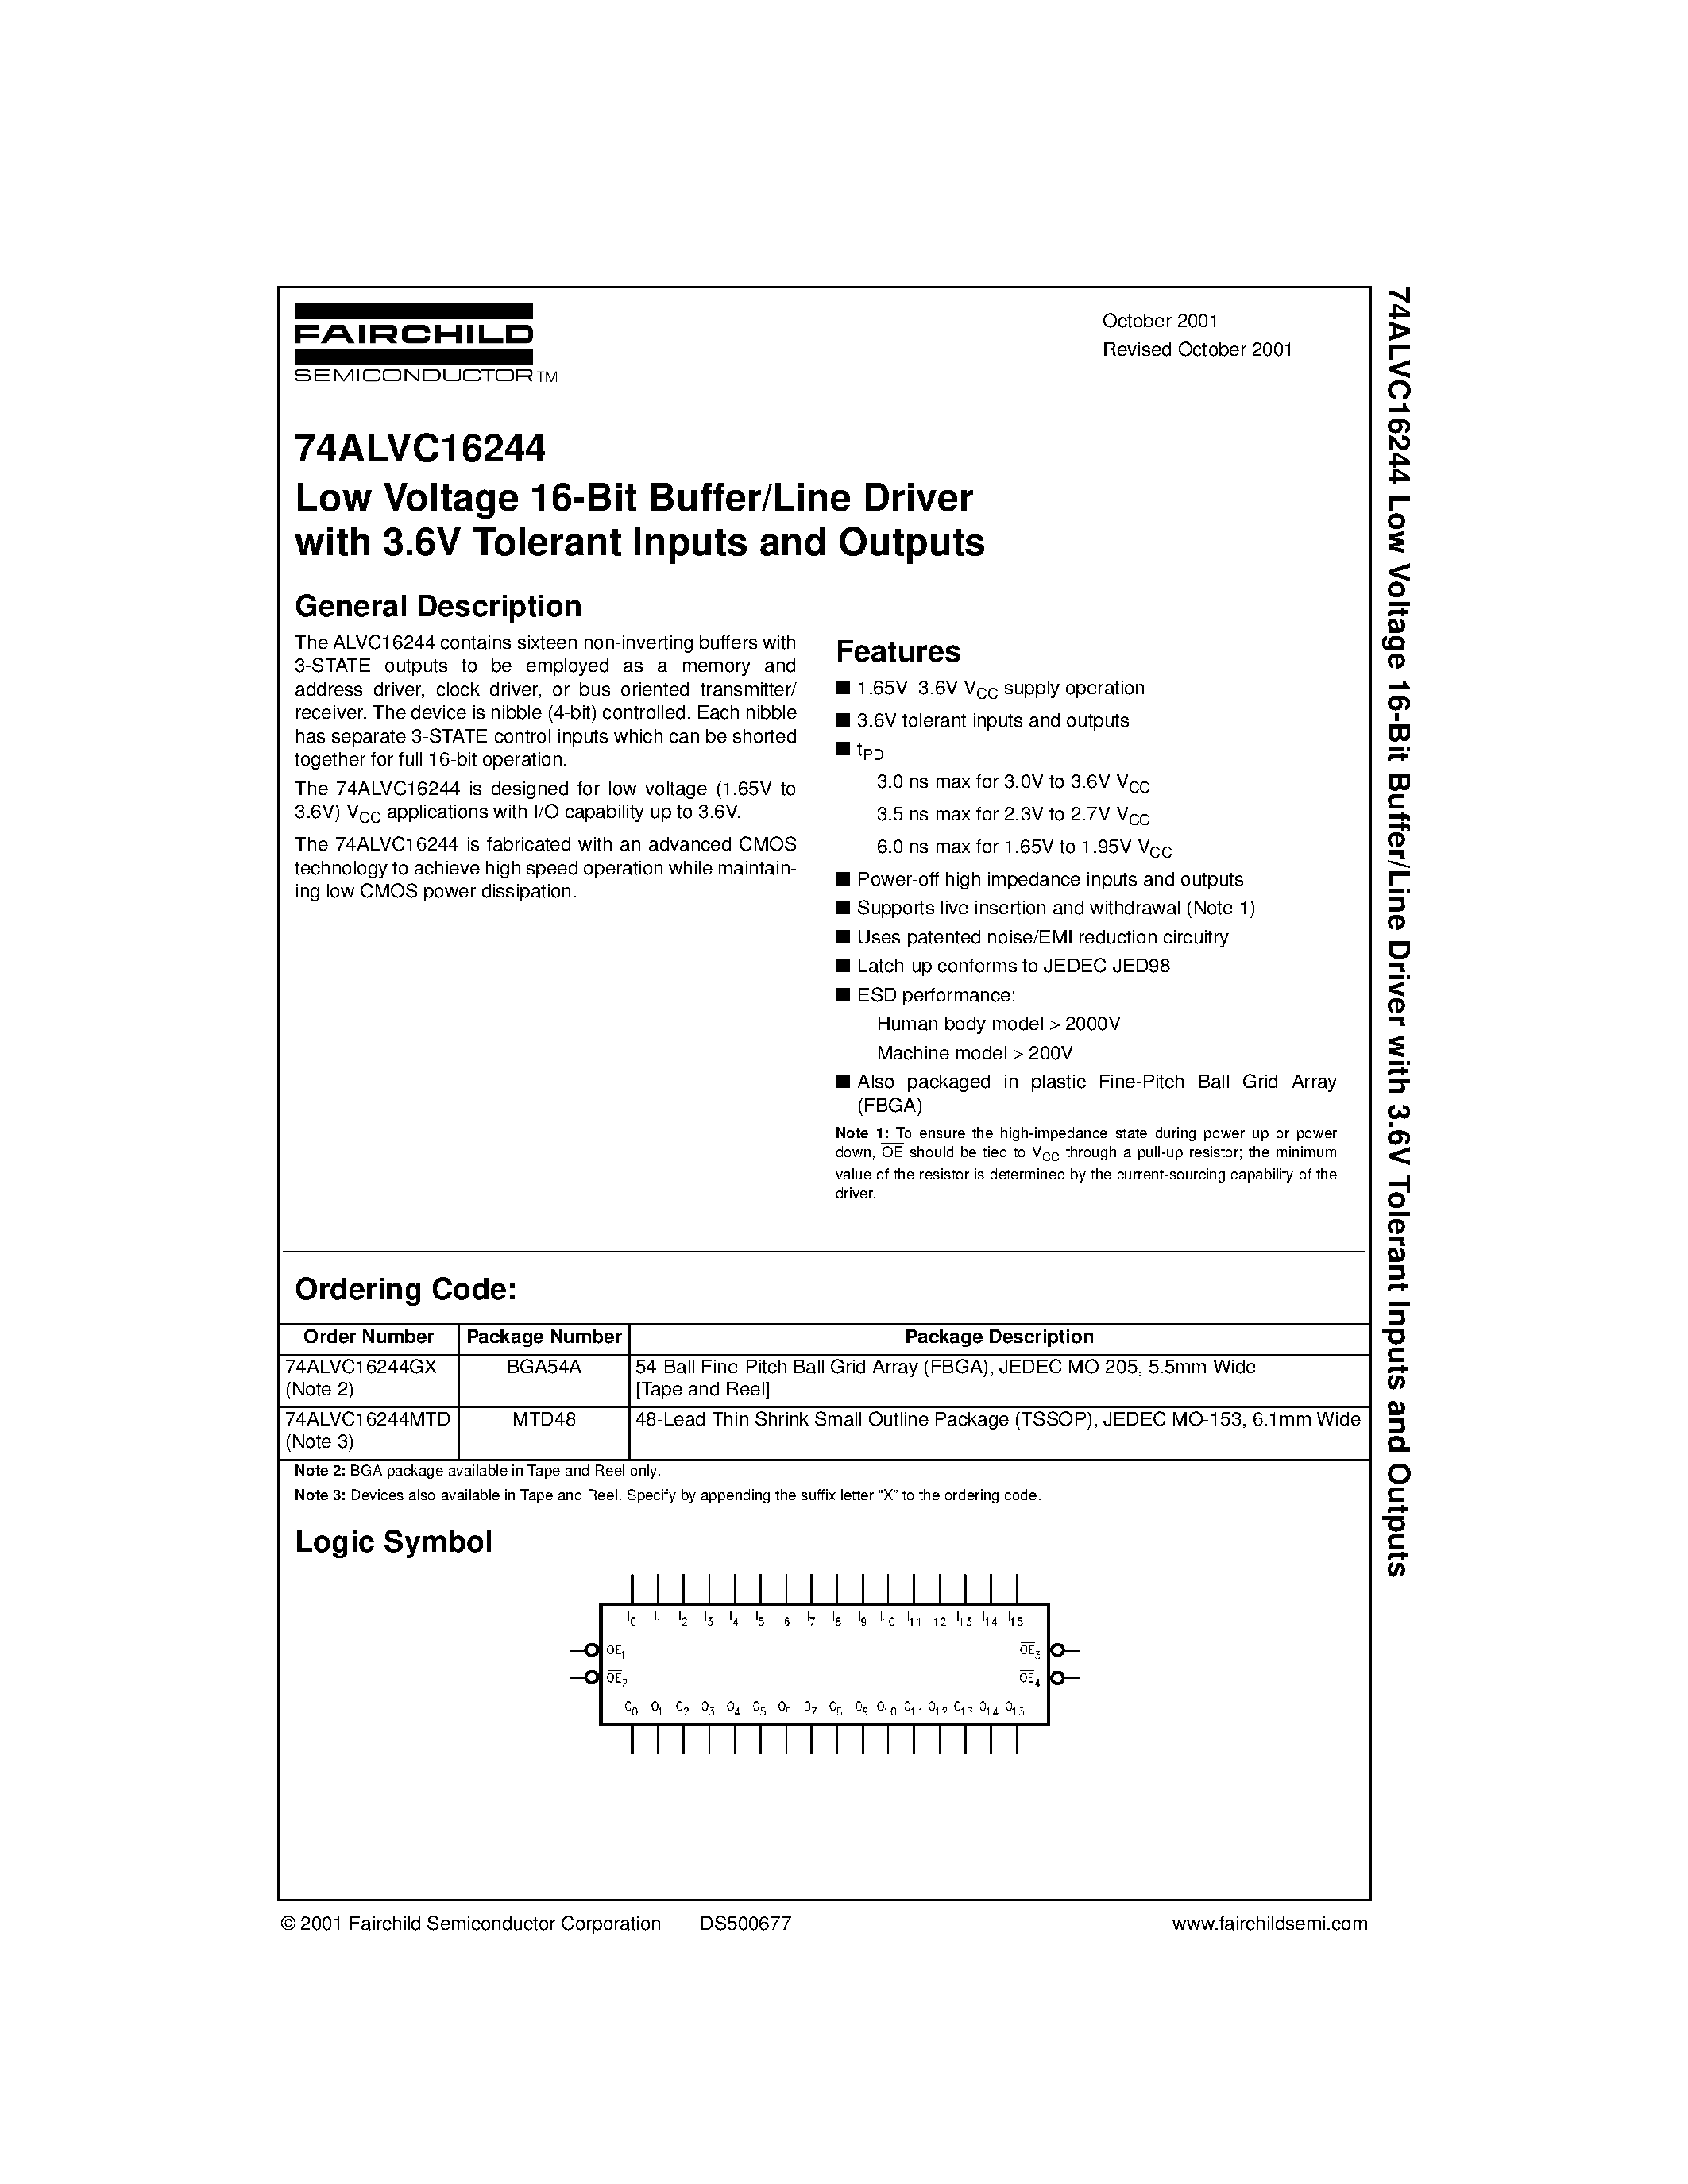 Datasheet 74ALVC16244 - Low Voltage 16-Bit Buffer/Line Driver with 3.6V Tolerant Inputs and Outputs page 1